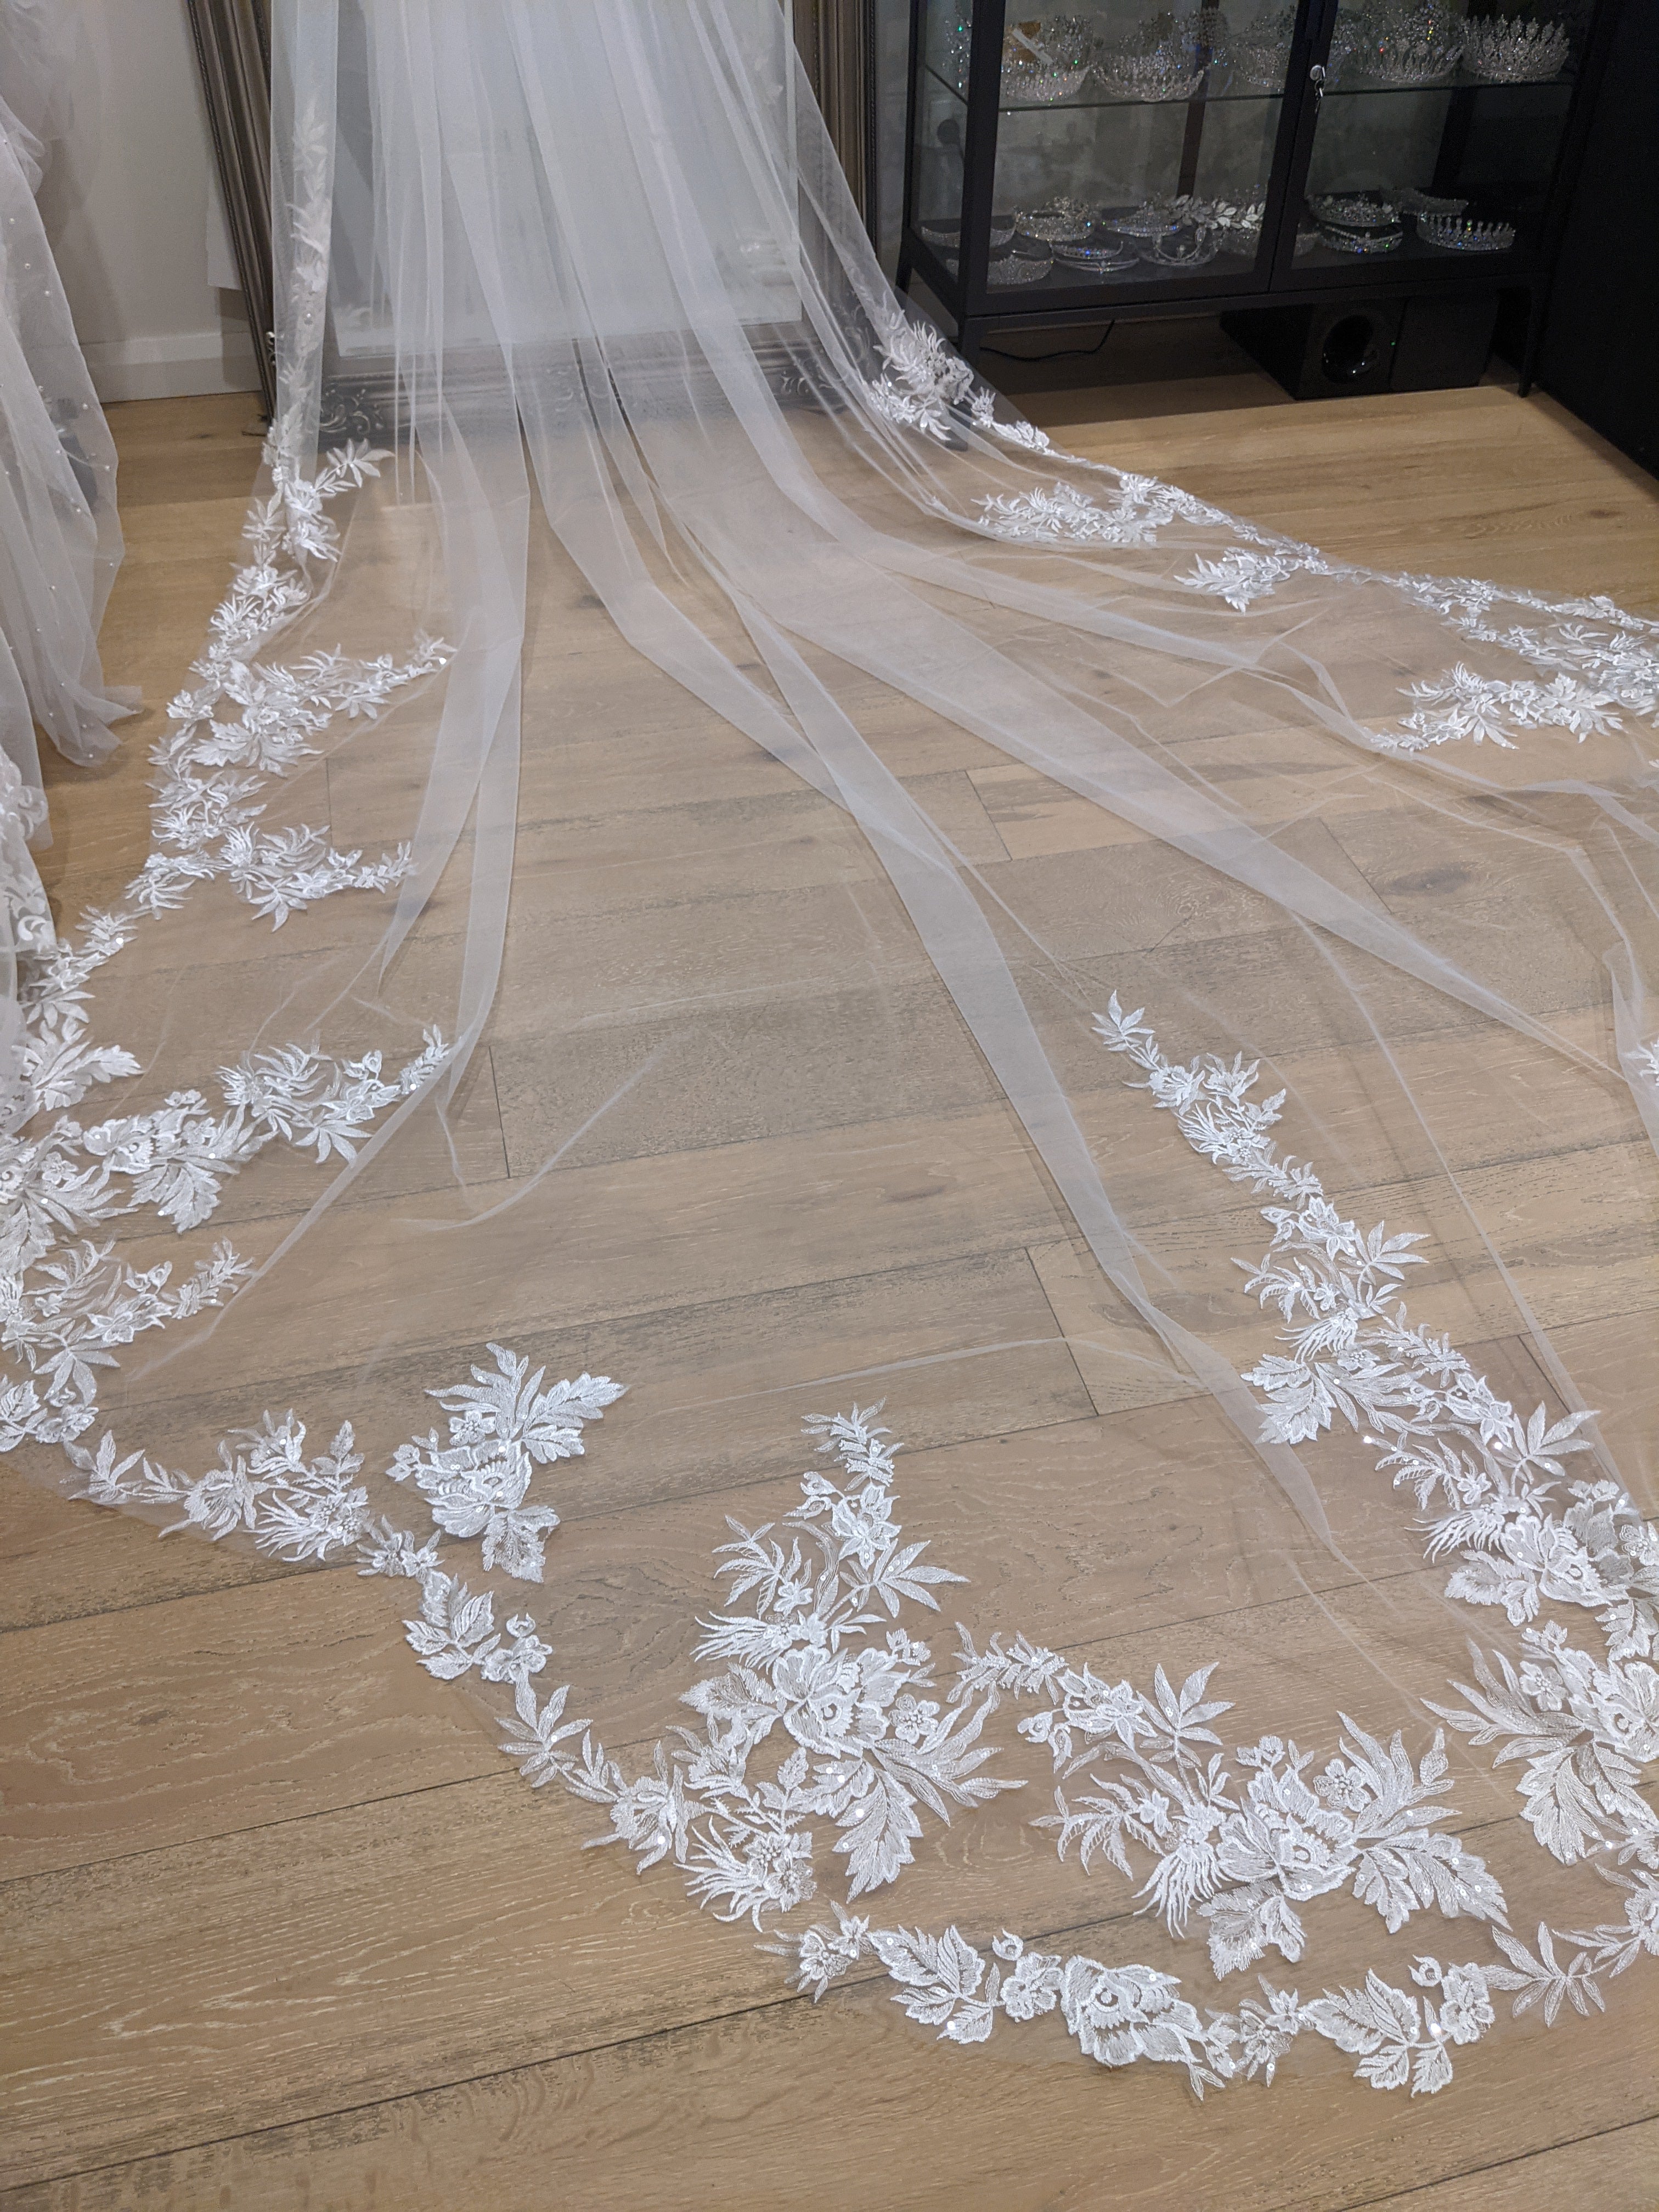 Scalloped Lace Cathedral Veil